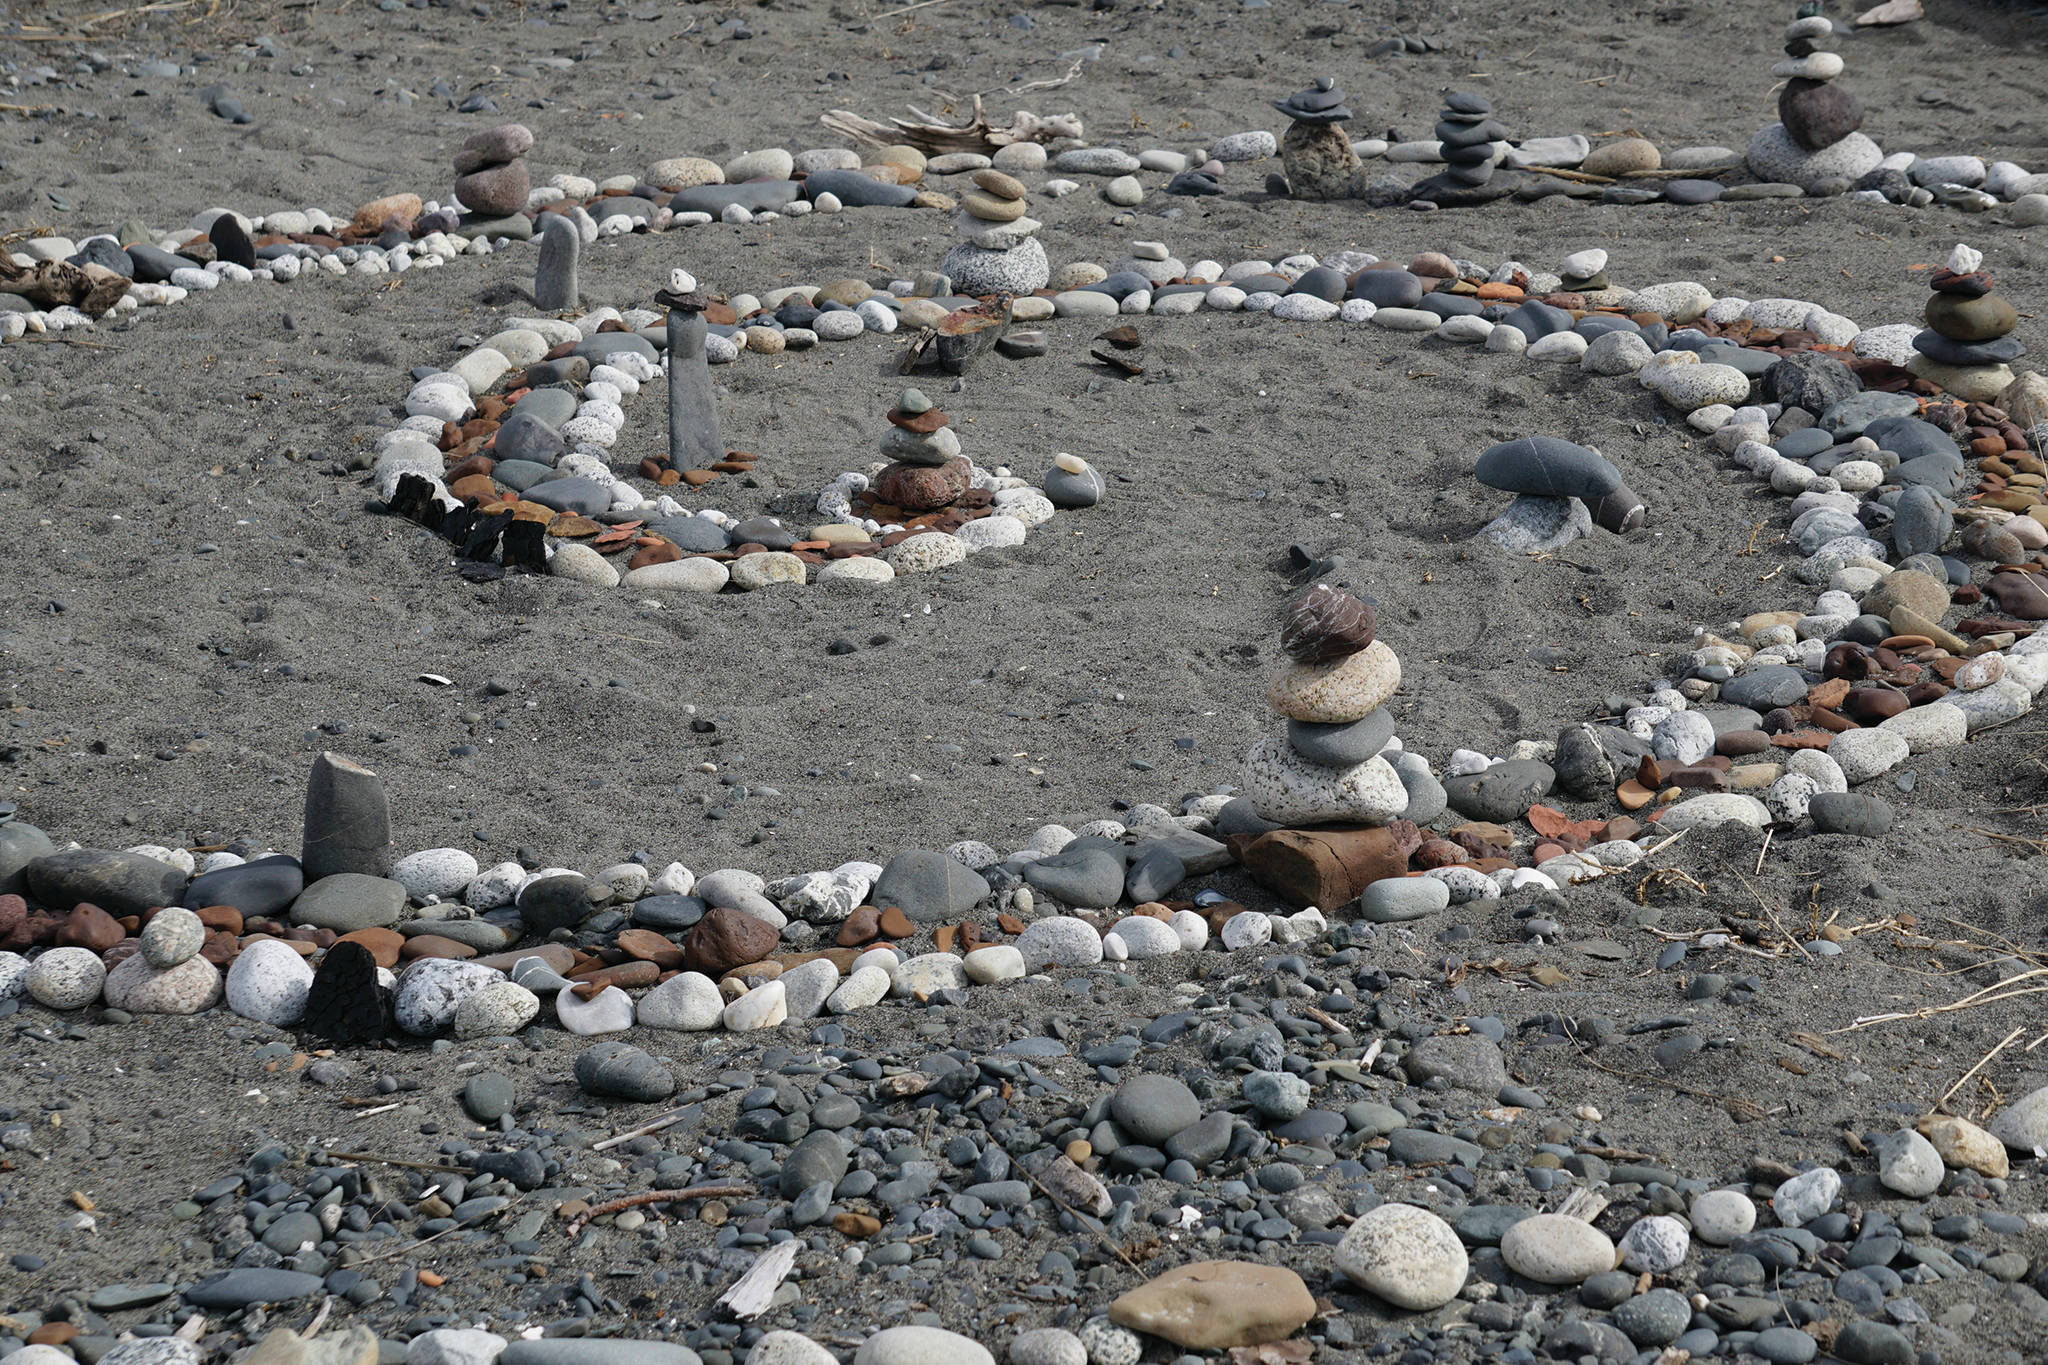 The Homer Council on the Arts community art project is open for creation on Friday, April 17, 2020, at Mariner Park on the Homer Spit in Homer, Alaska. (Photo by Michael Armstrong/Homer News)